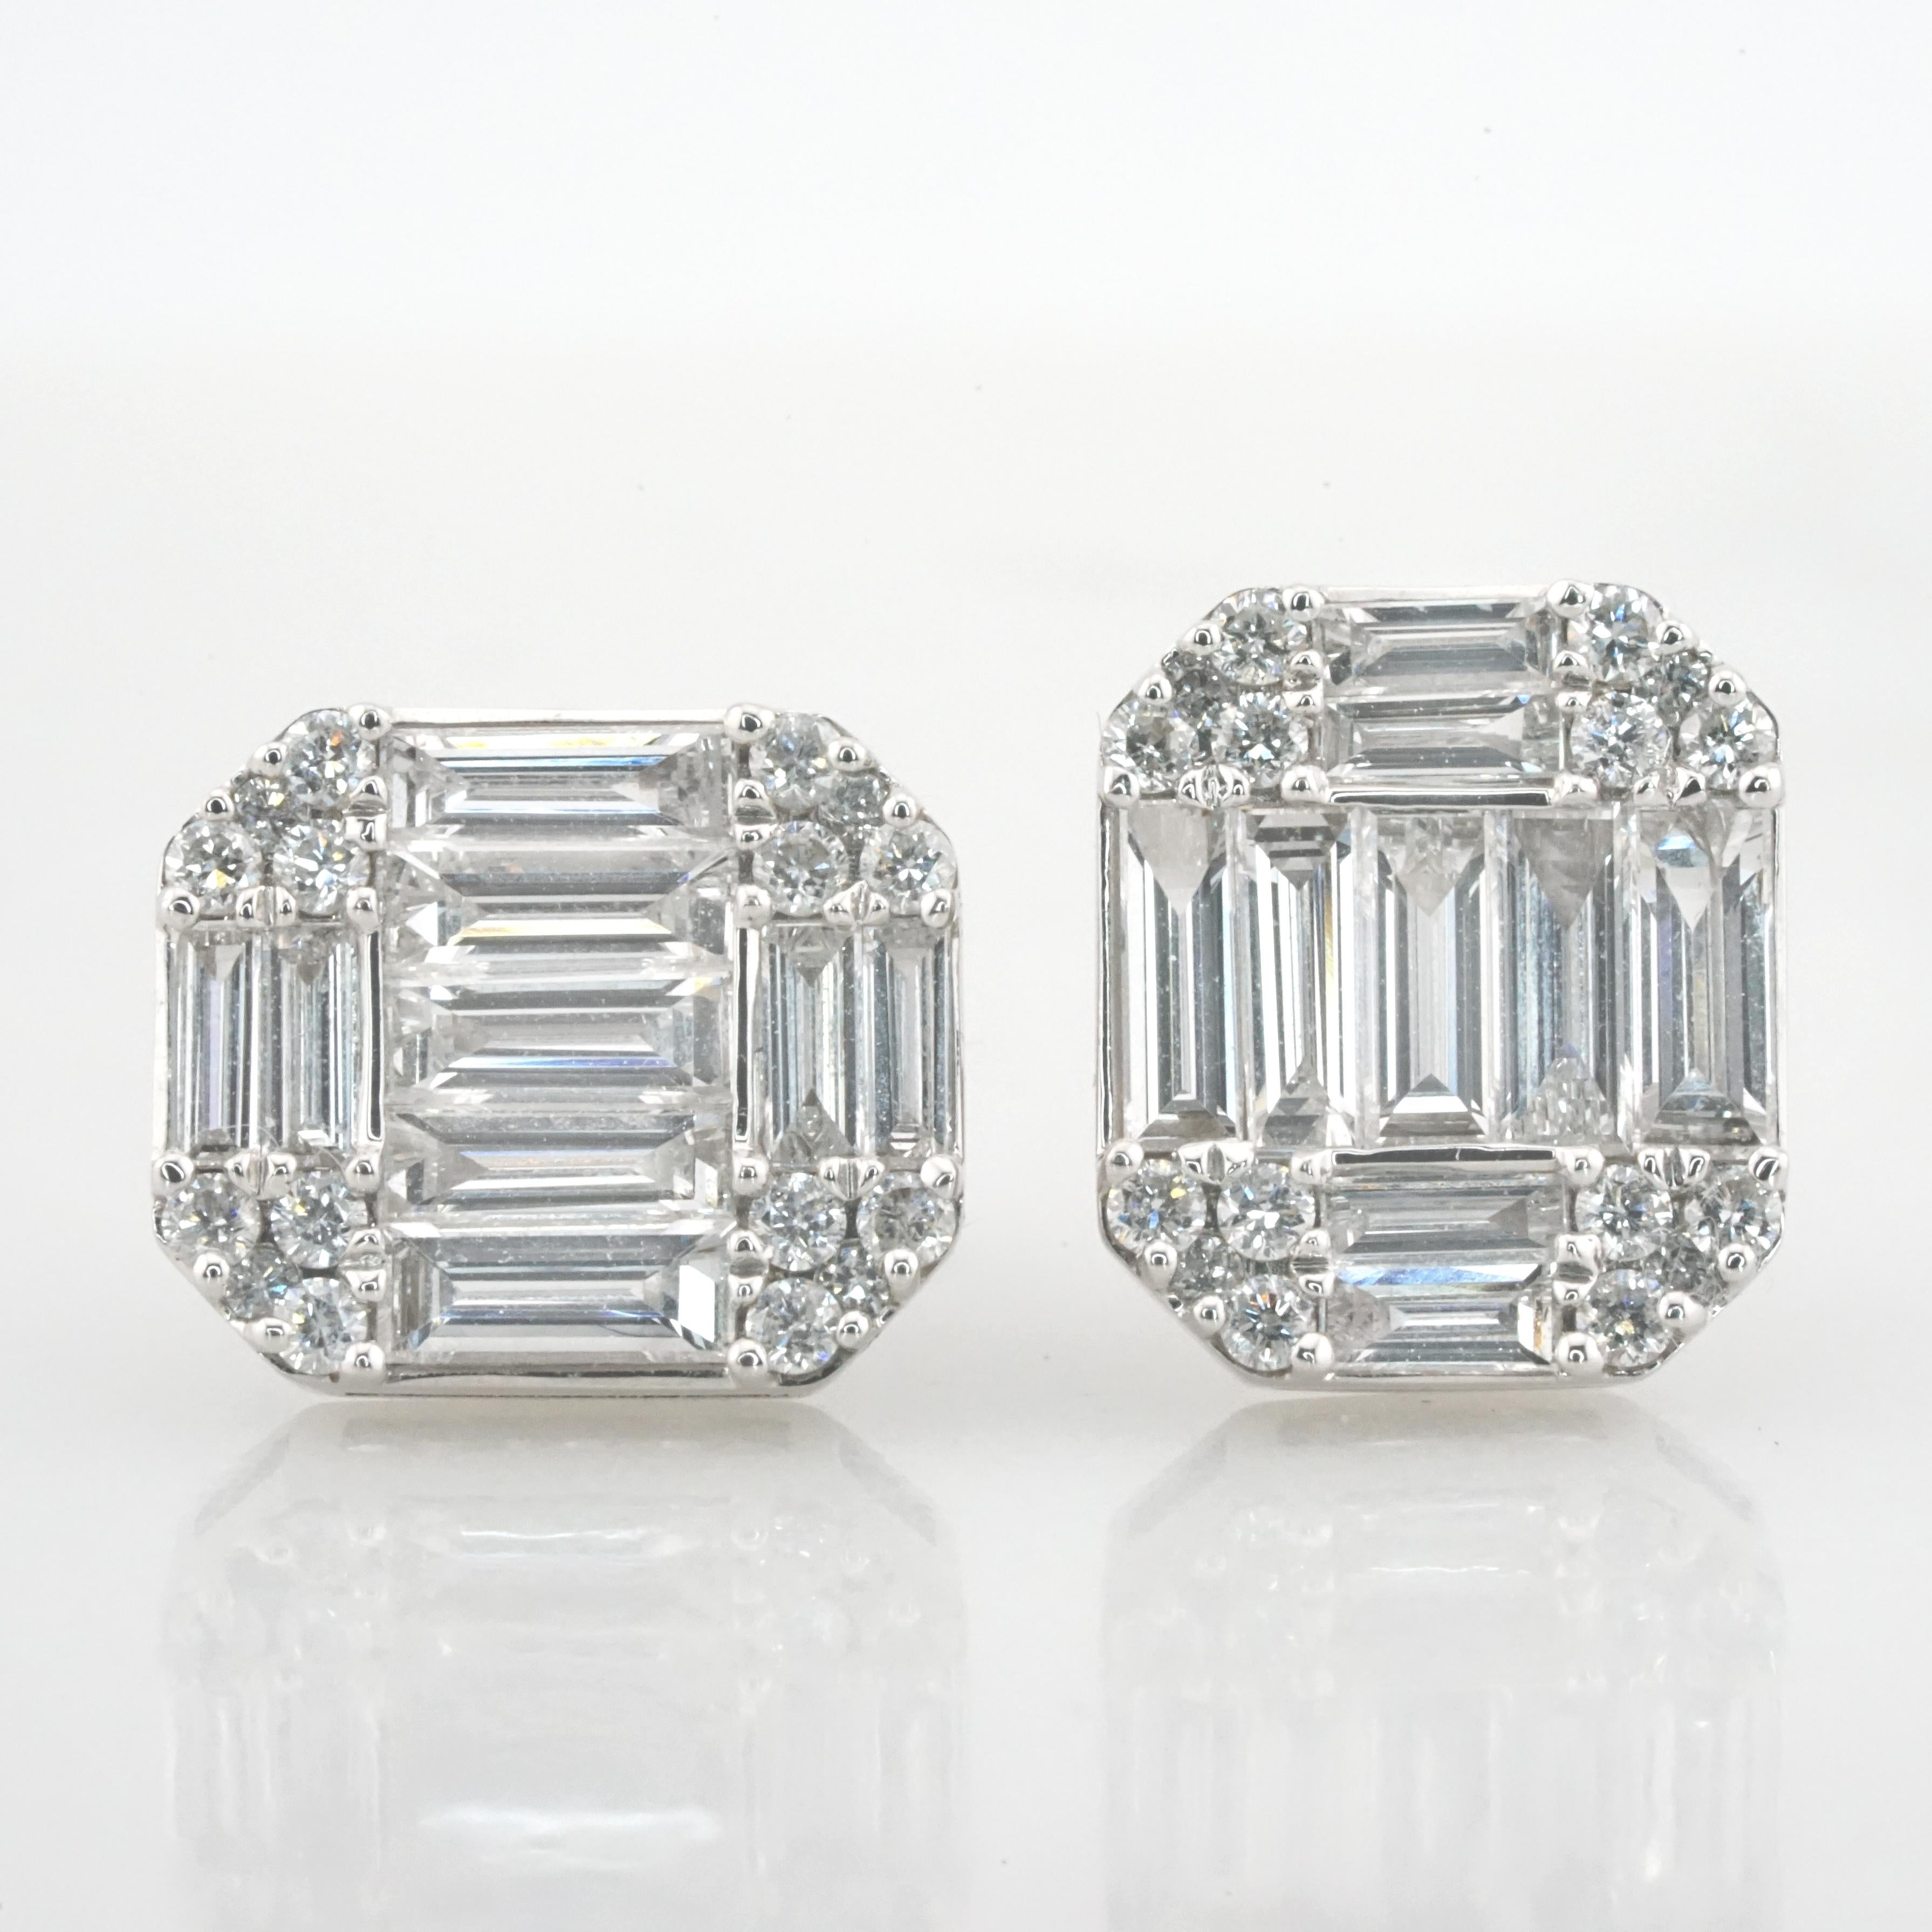 Presenting a pair of exquisite 1.46 carat total weight diamond stud earrings, meticulously crafted by the renowned Antinori Di Sanpietro. Set in lustrous 18k white gold, these earrings feature a collection of radiant baguette-cut diamonds, carefully